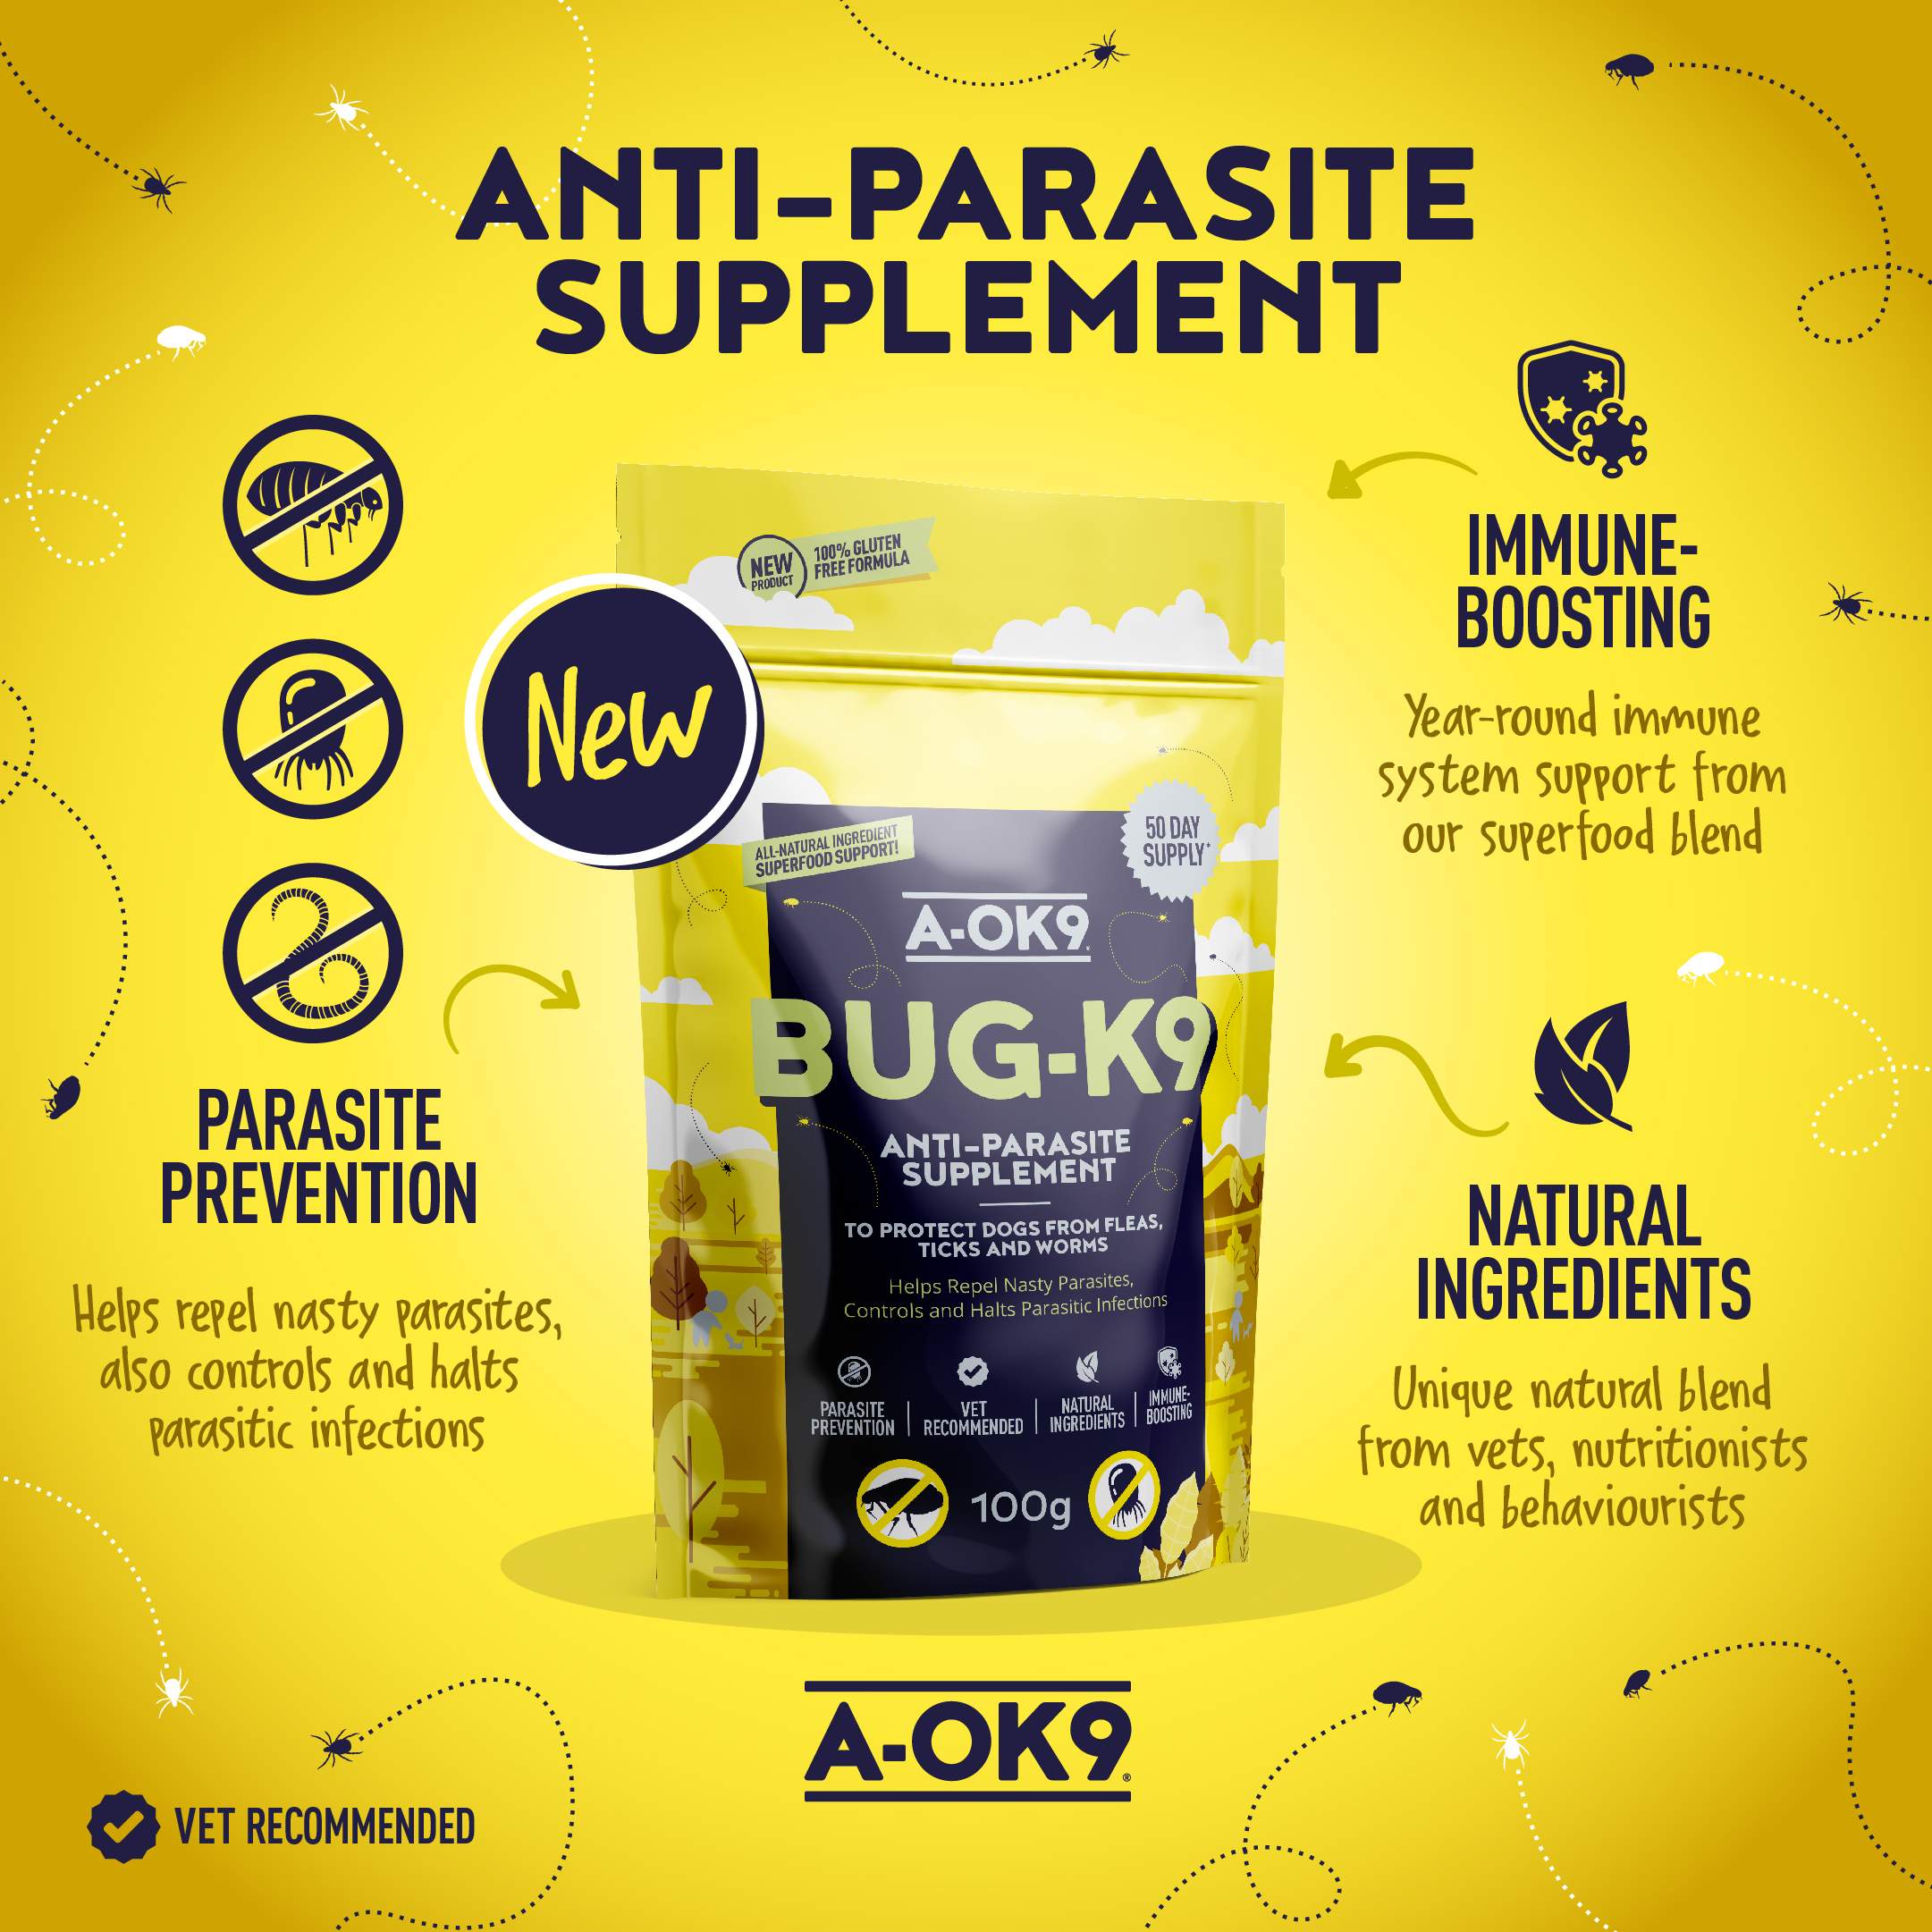 all-in-one immune boosting anti-parasitic that combats fleas and worms in one simple and easy to giv